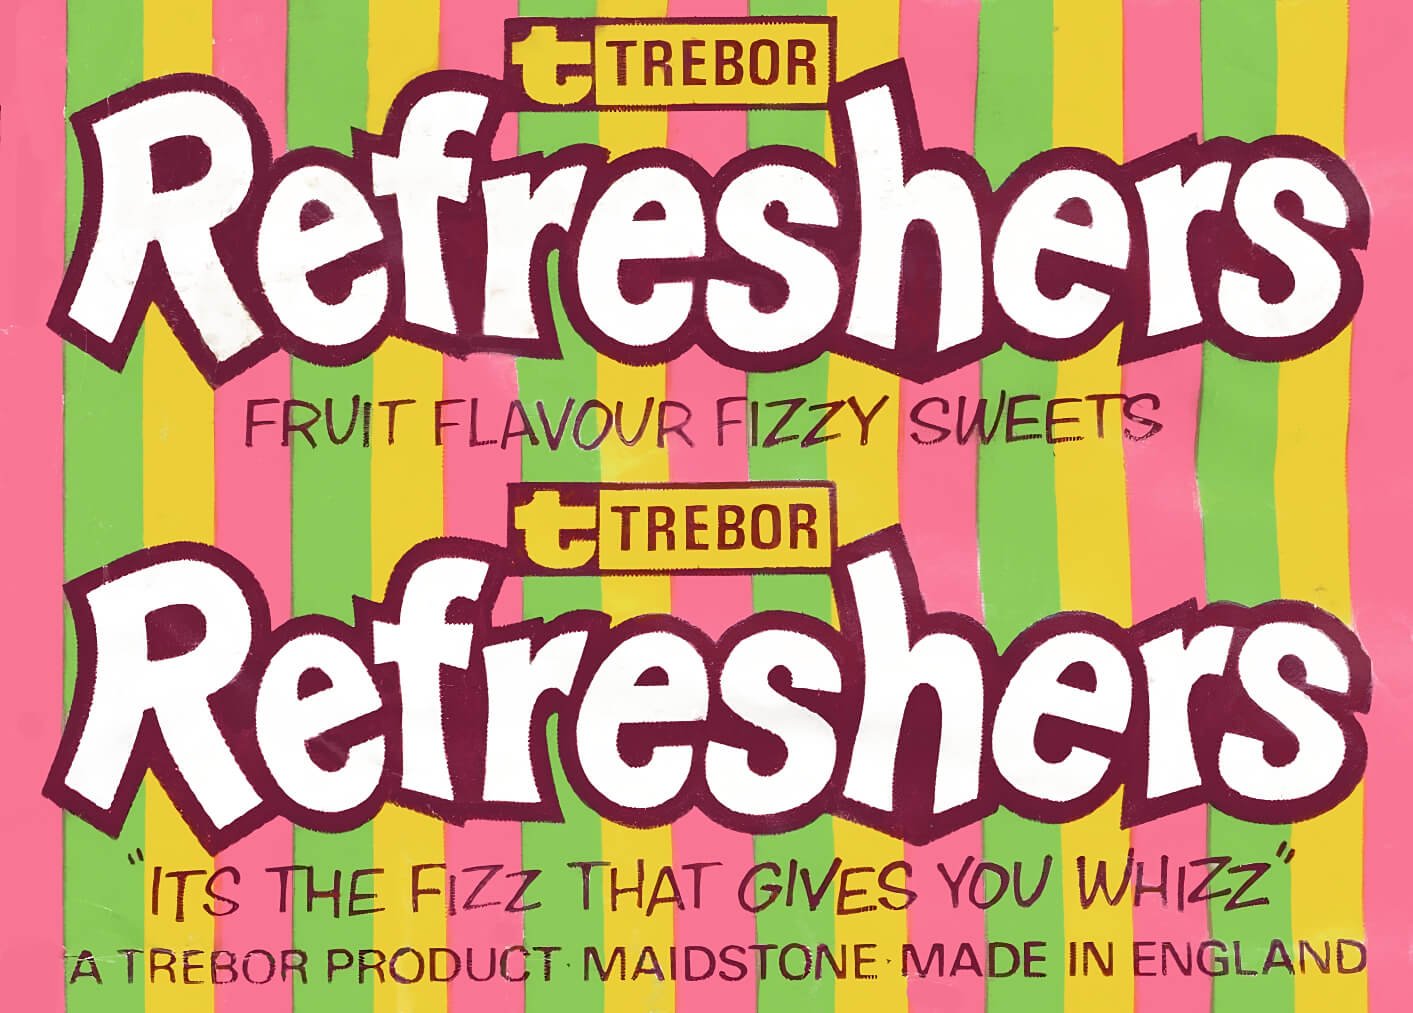 Trebor Refreshers wrapper, 1980s. Pink, green and yellow stripes.